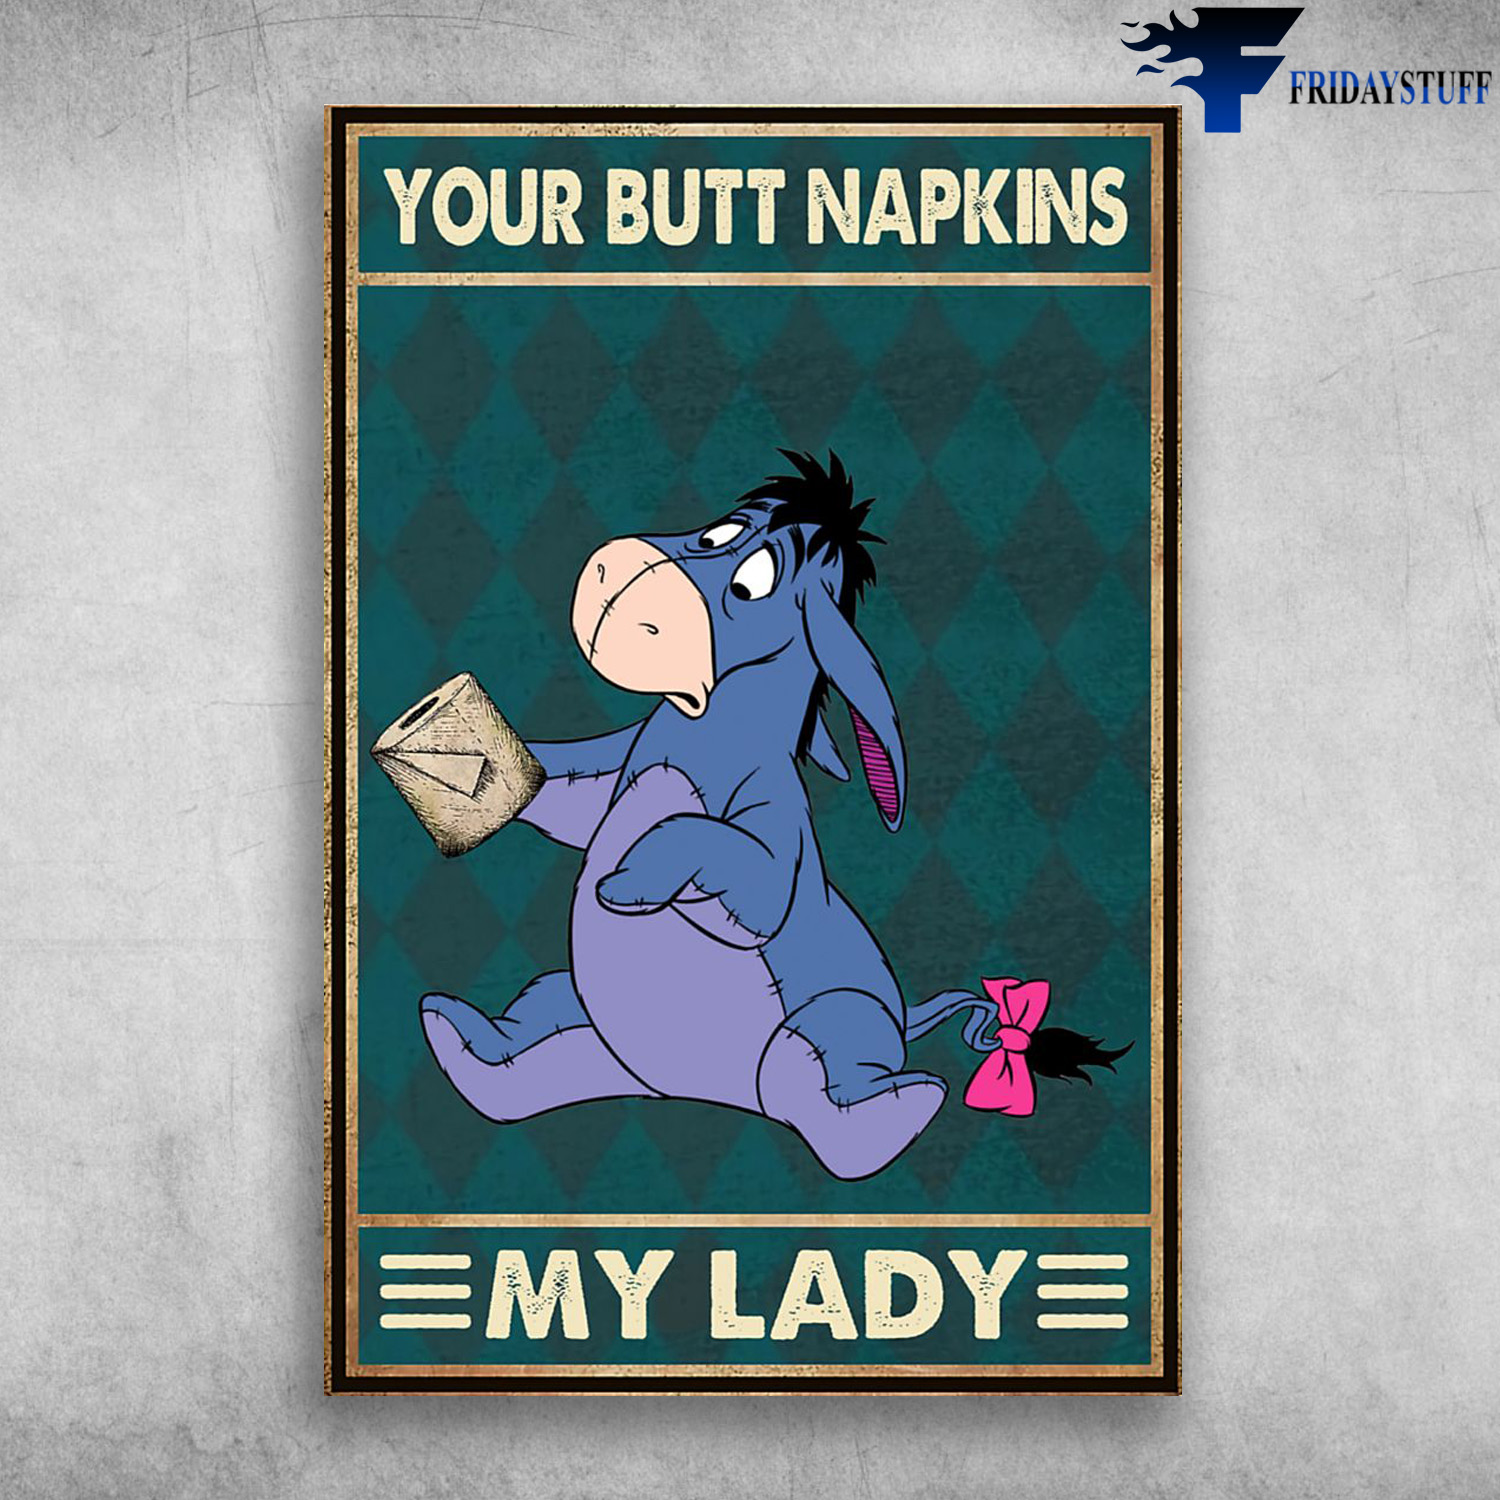 Eeyore With Toilet Paper Roll - Your Butt Napkins, My Lady